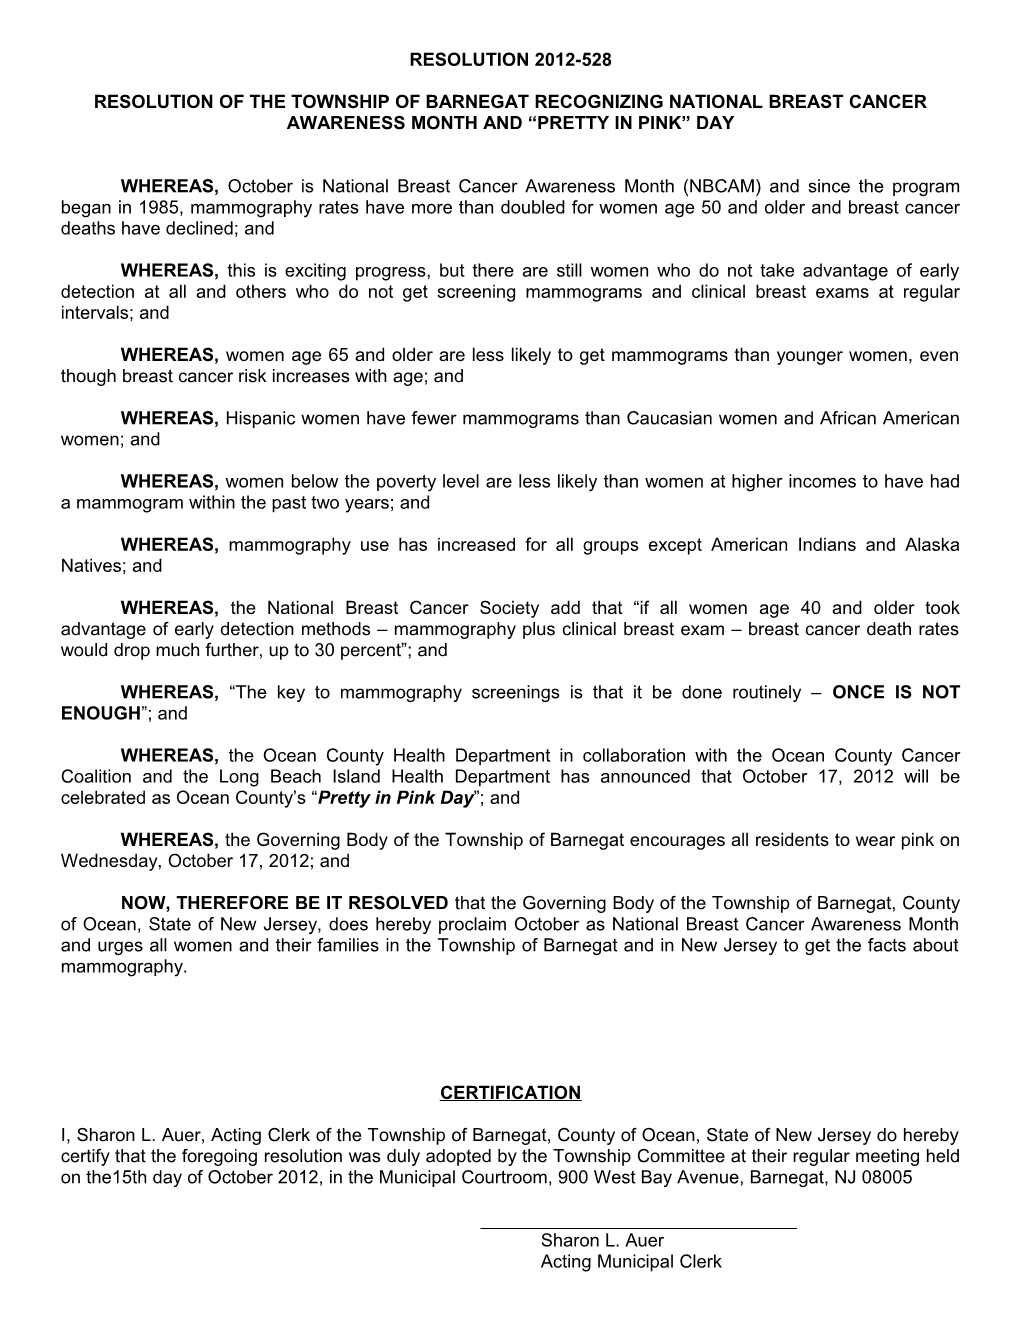 Resolution of the Borough of South Toms River Recognizing National Breast Cancer Awareness